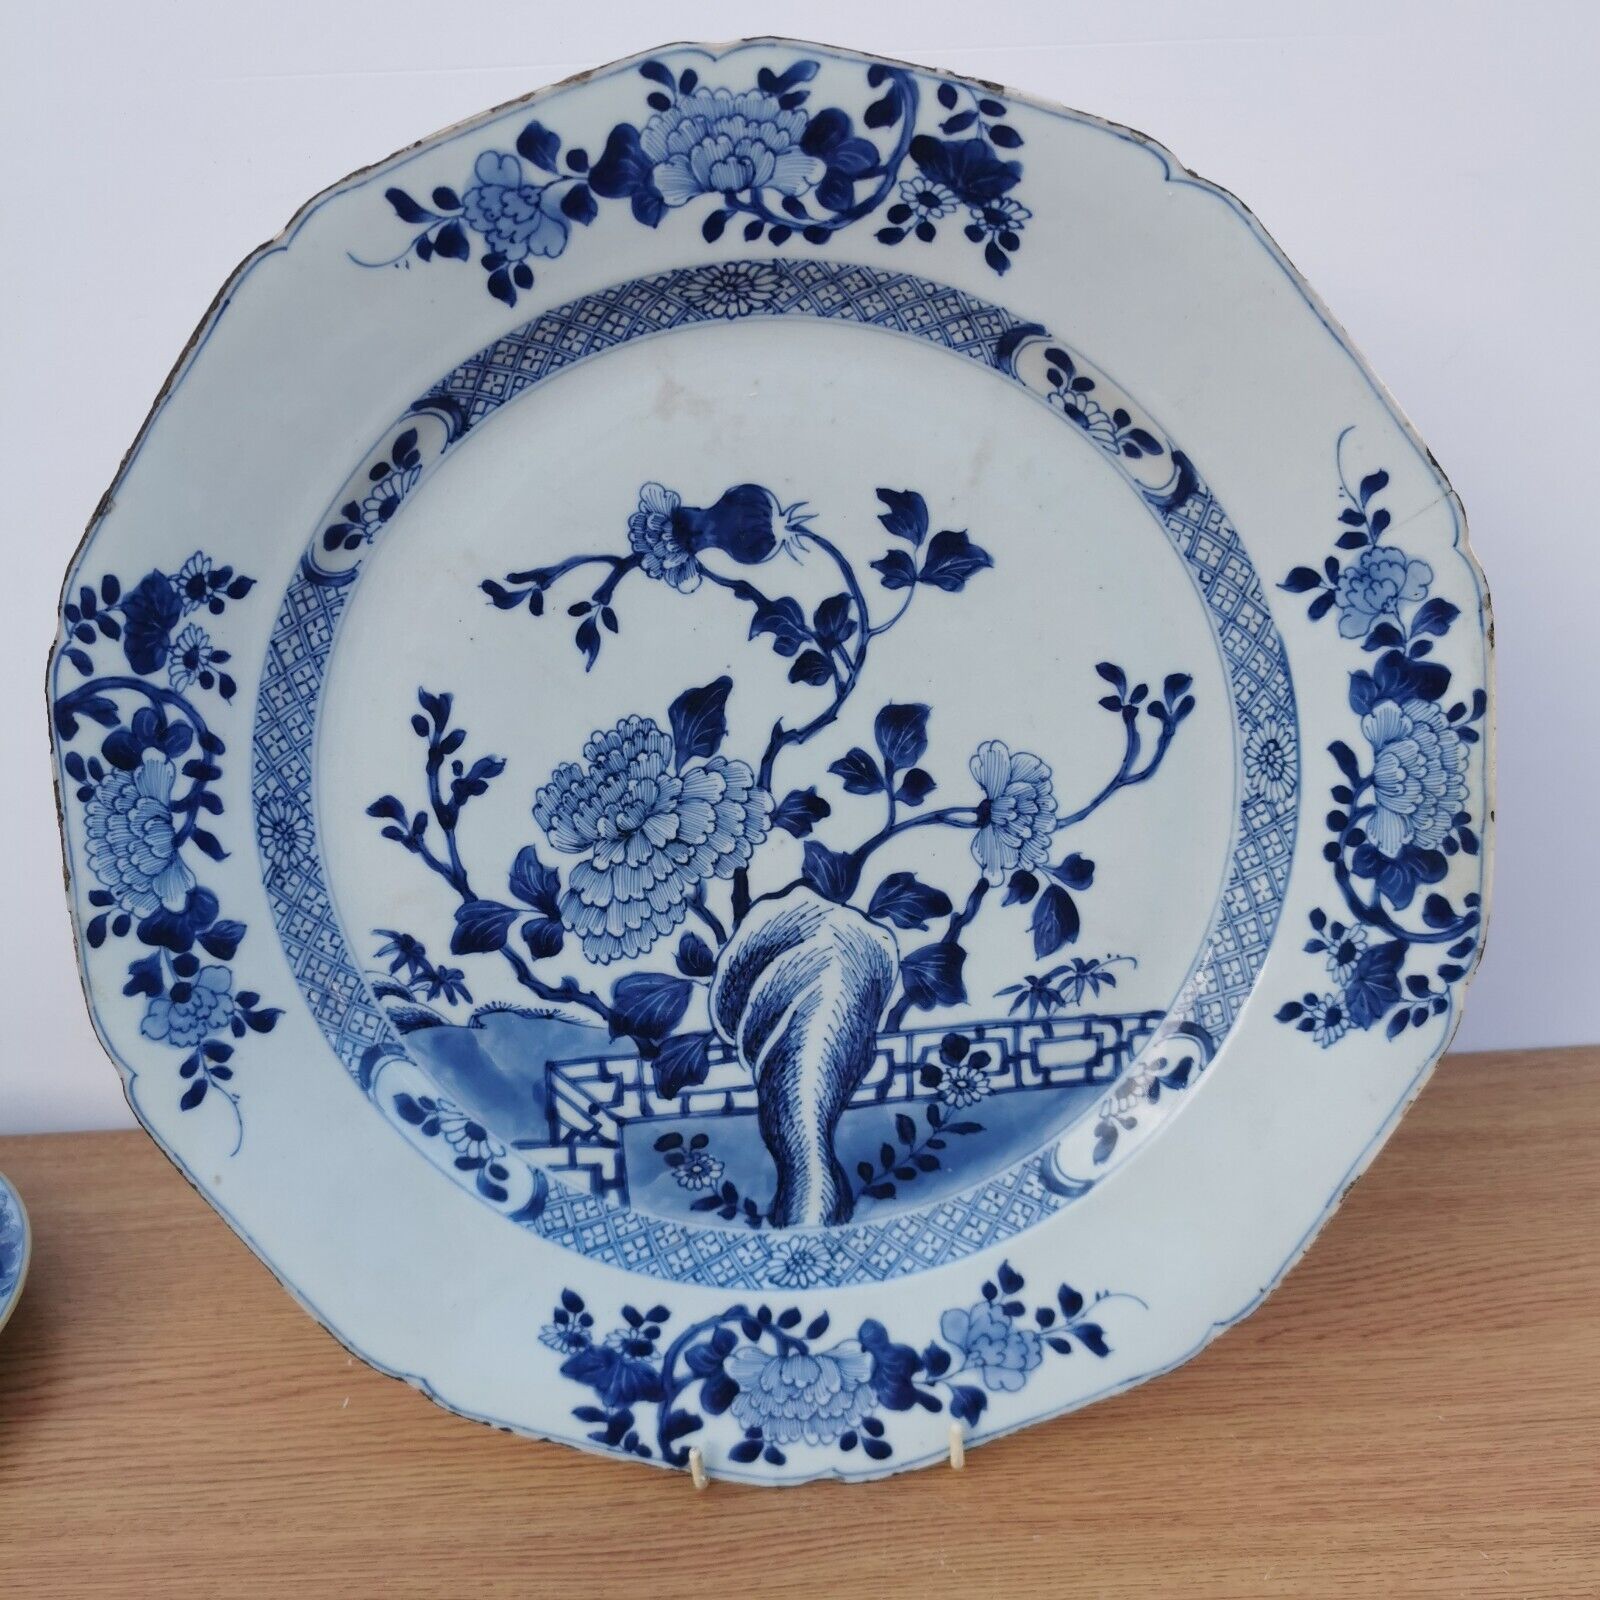 18th Century Chinese Export Charger Porcelain Octagonal Plate